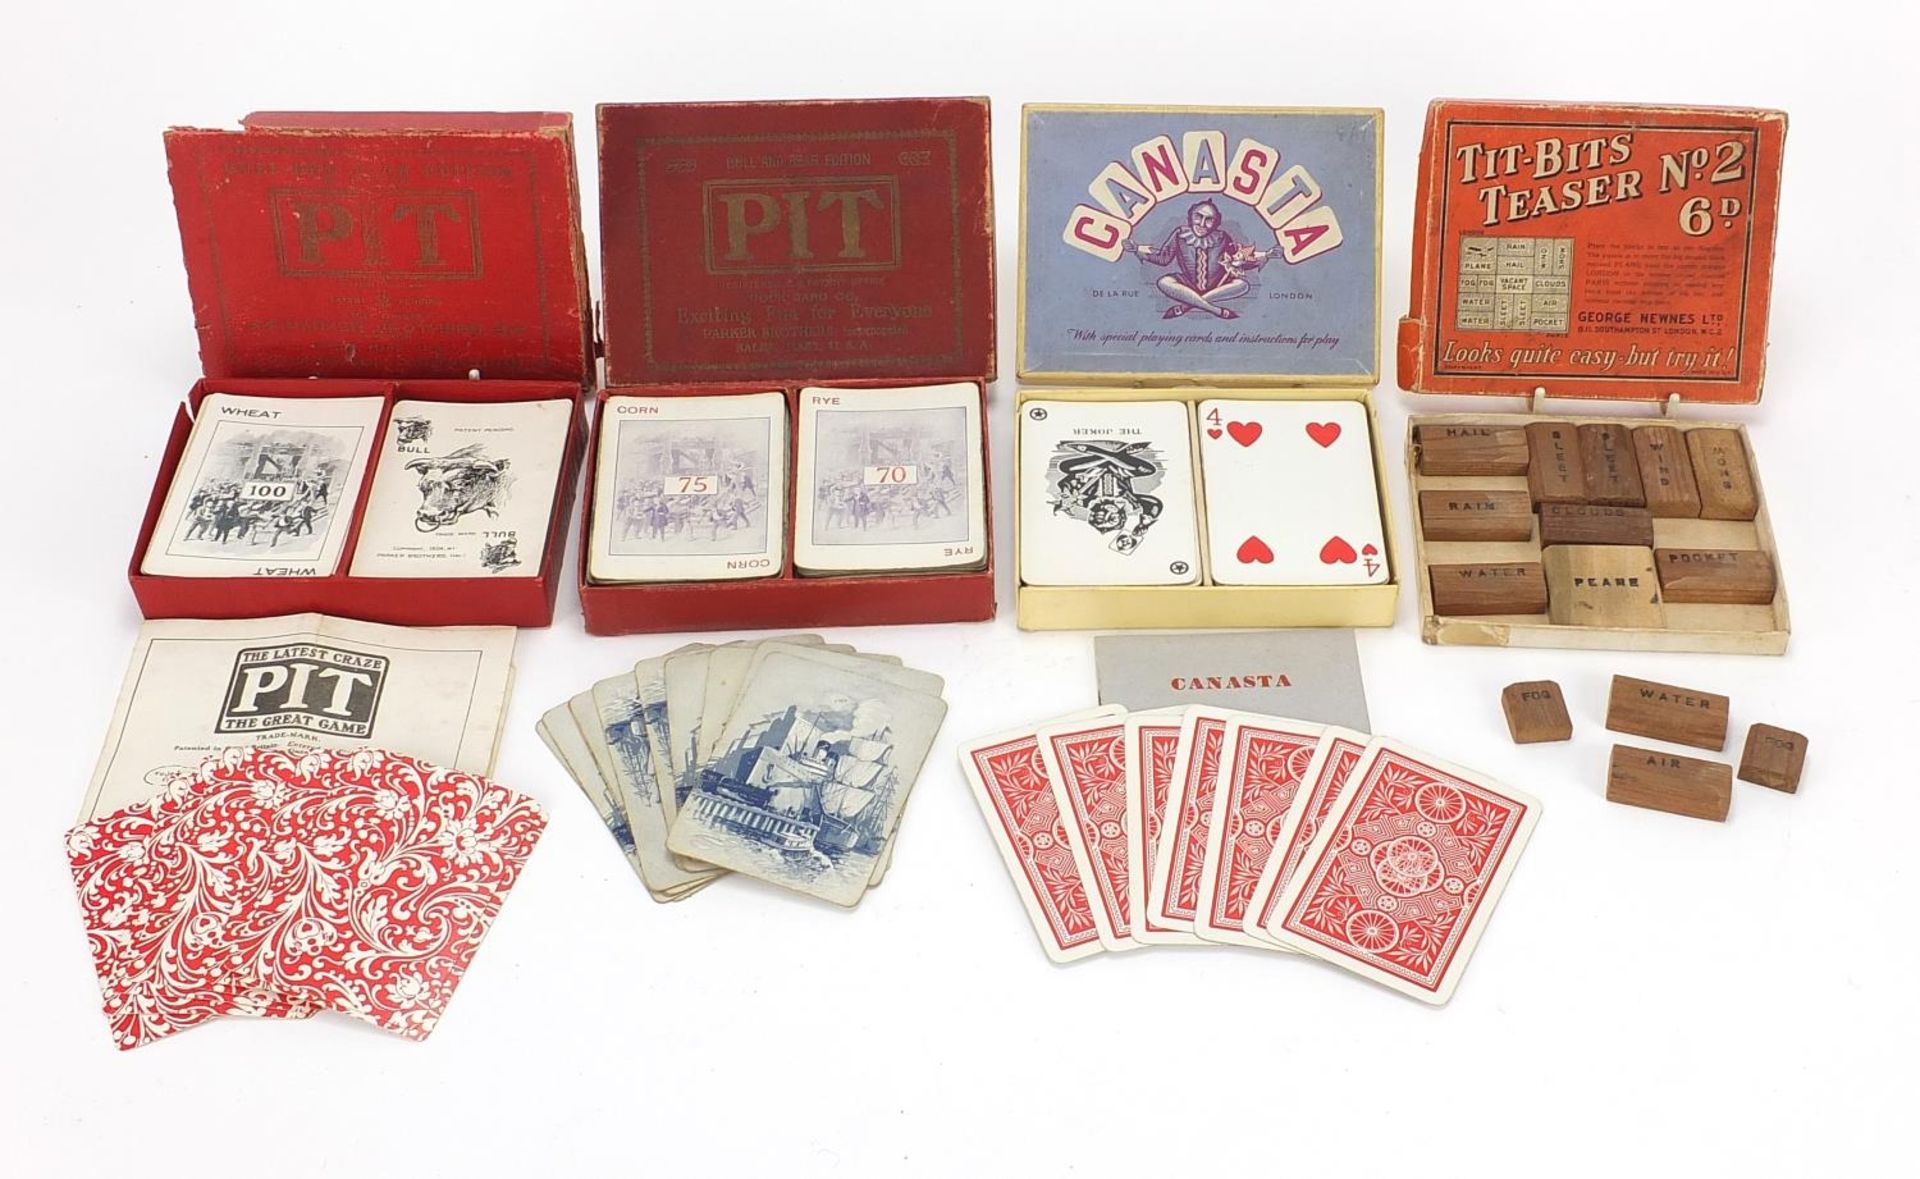 Four vintage games comprising Pit, Tit-Bits Teaser and Canasta : For Further Condition Reports